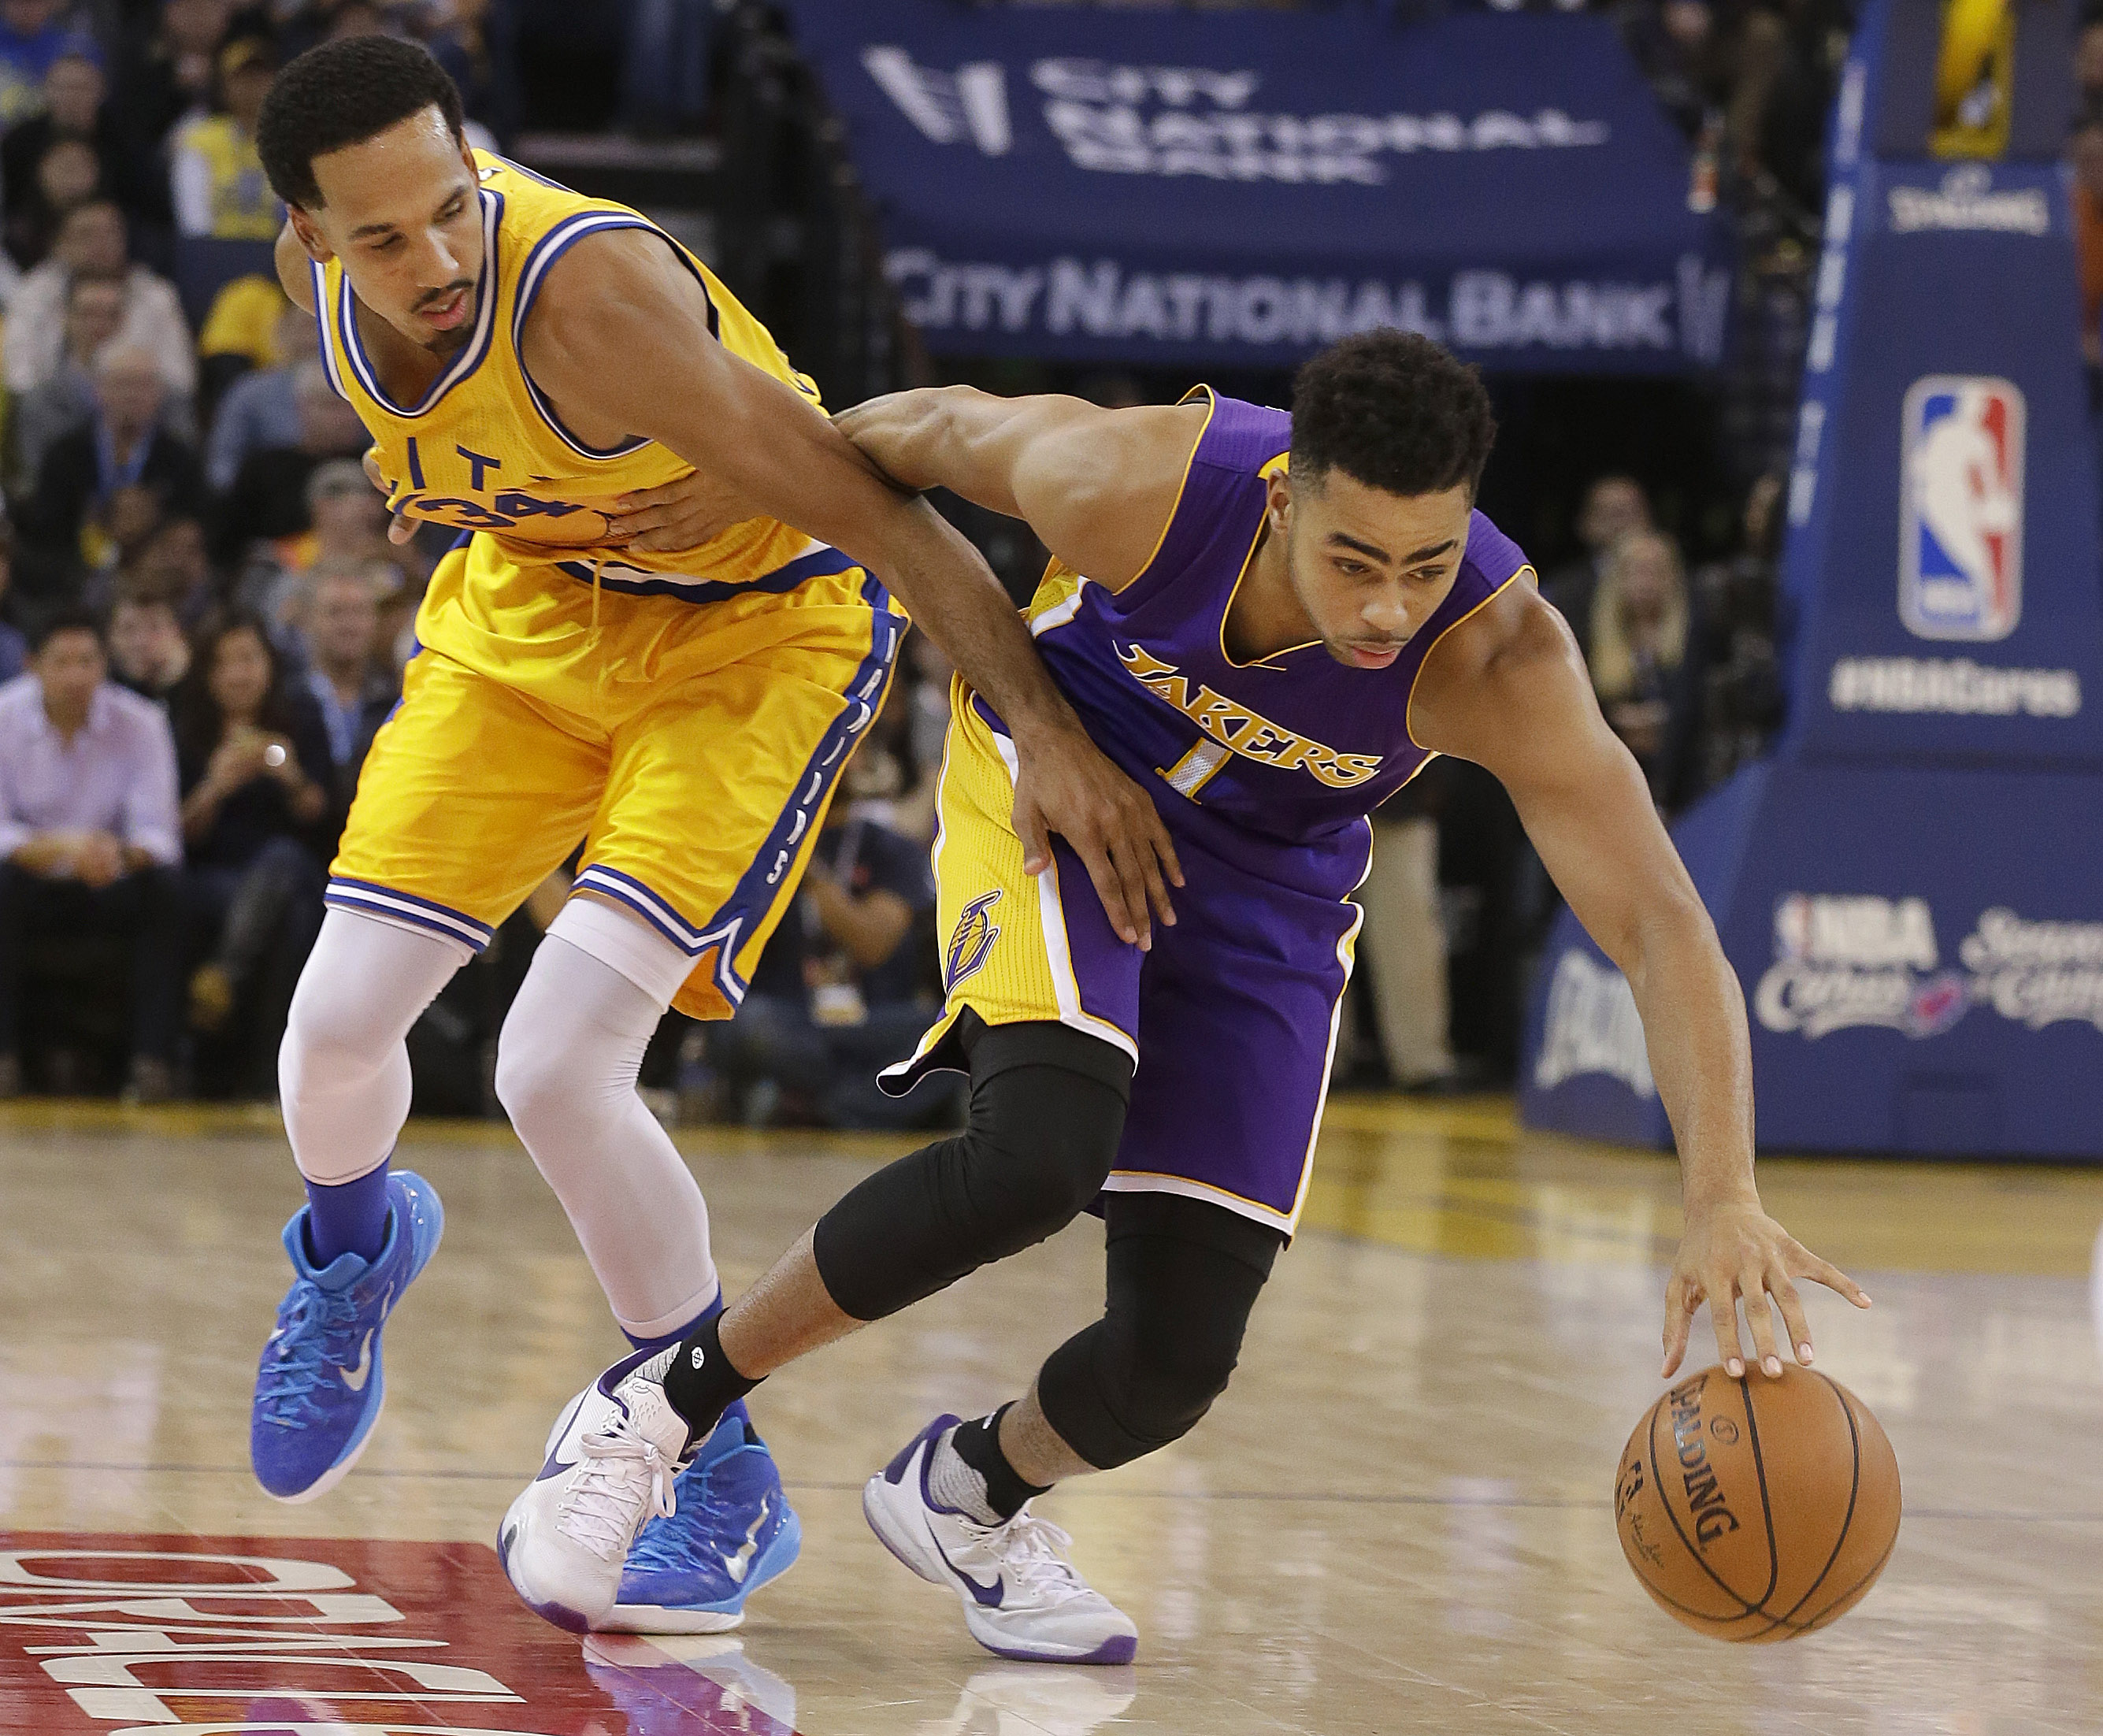 Los Angeles Lakers guard D'Angelo Russell (1) dribbles past Golden State Warriors guard Shaun Livingston during the first half of an NBA basketball game in Oakland, Calif., Tuesday, Nov. 24, 2015. (AP Photo/Jeff Chiu)